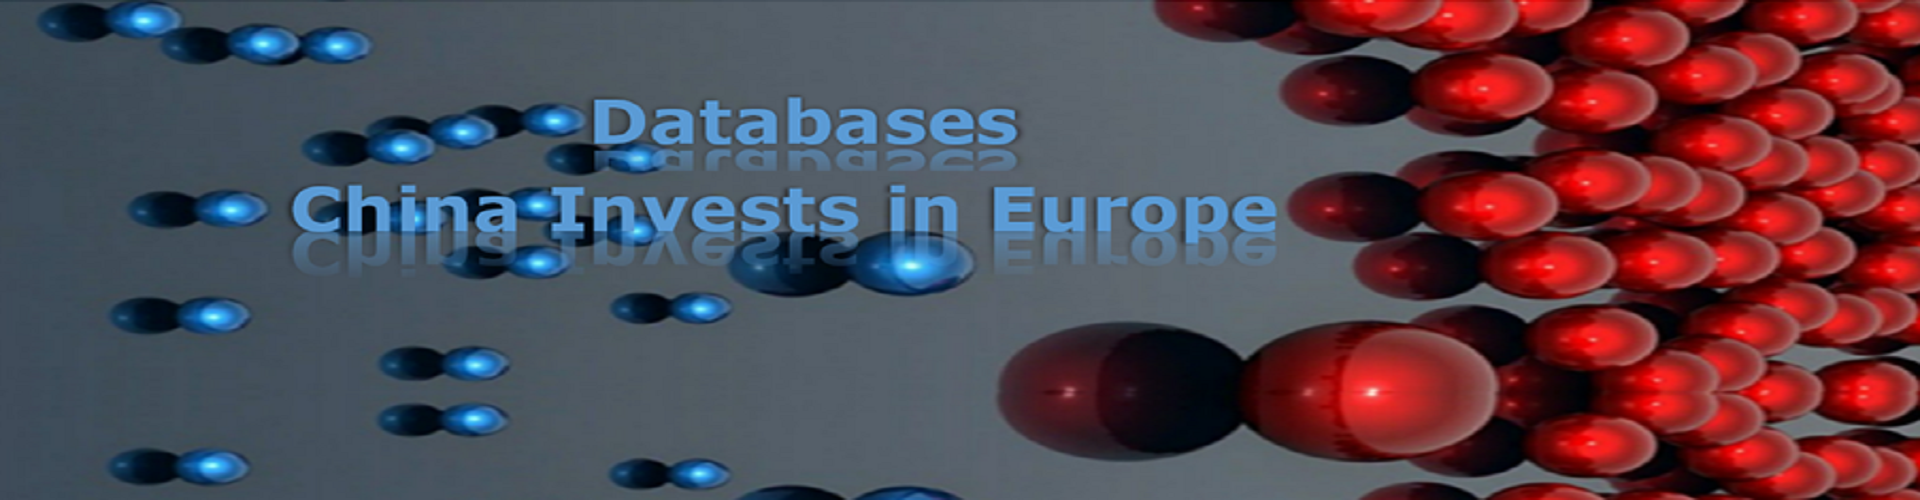 Databases-China-invests-in-Europe-